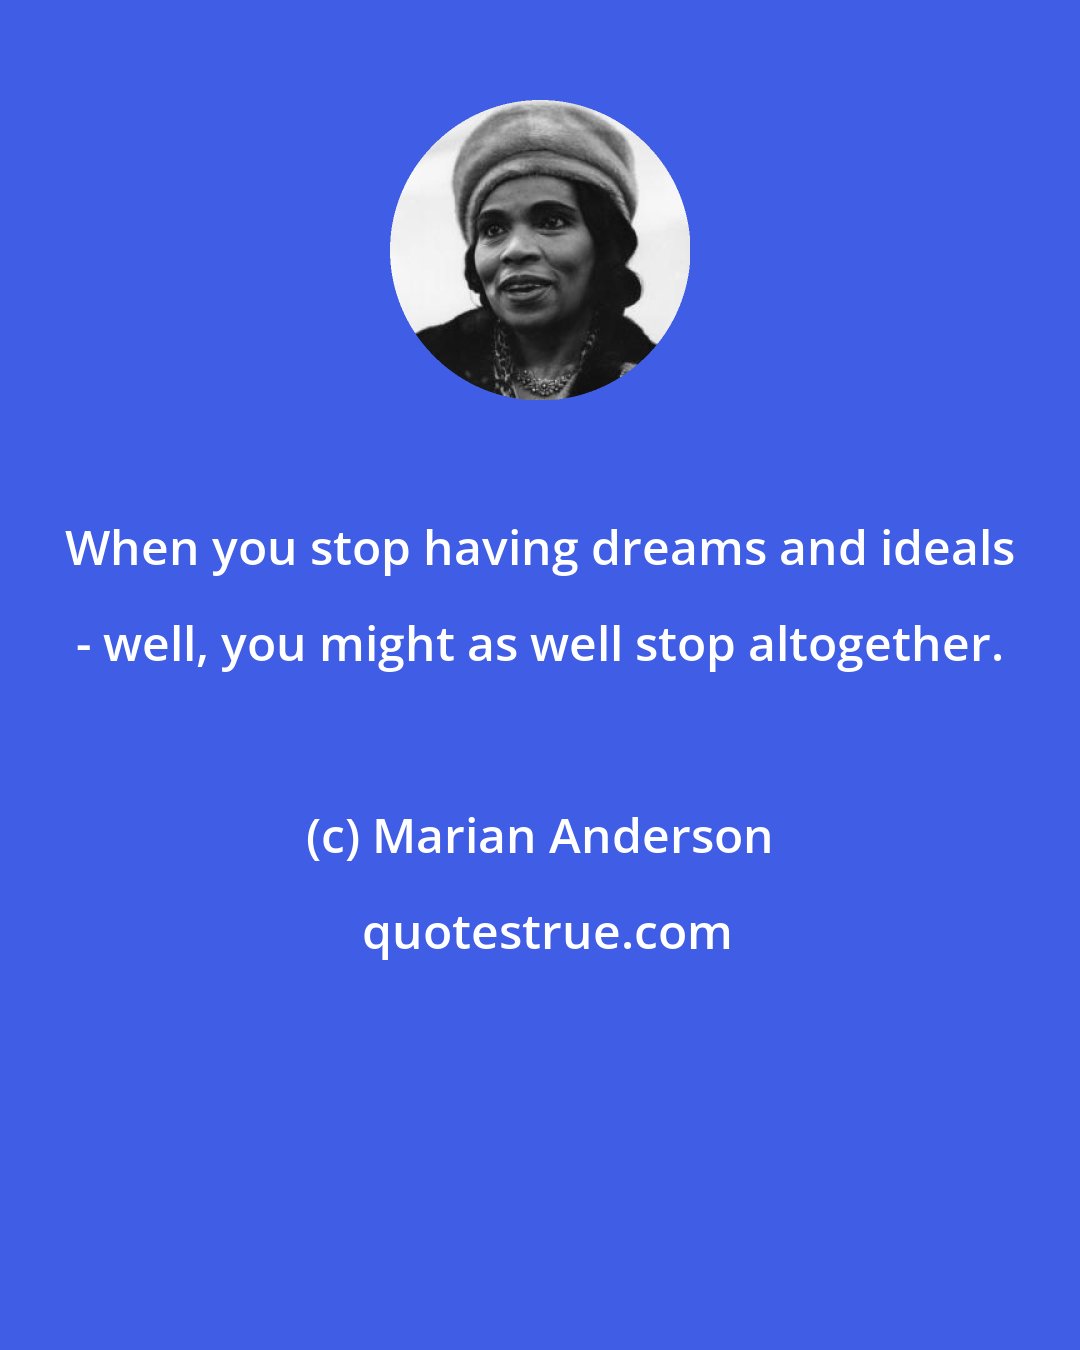 Marian Anderson: When you stop having dreams and ideals - well, you might as well stop altogether.